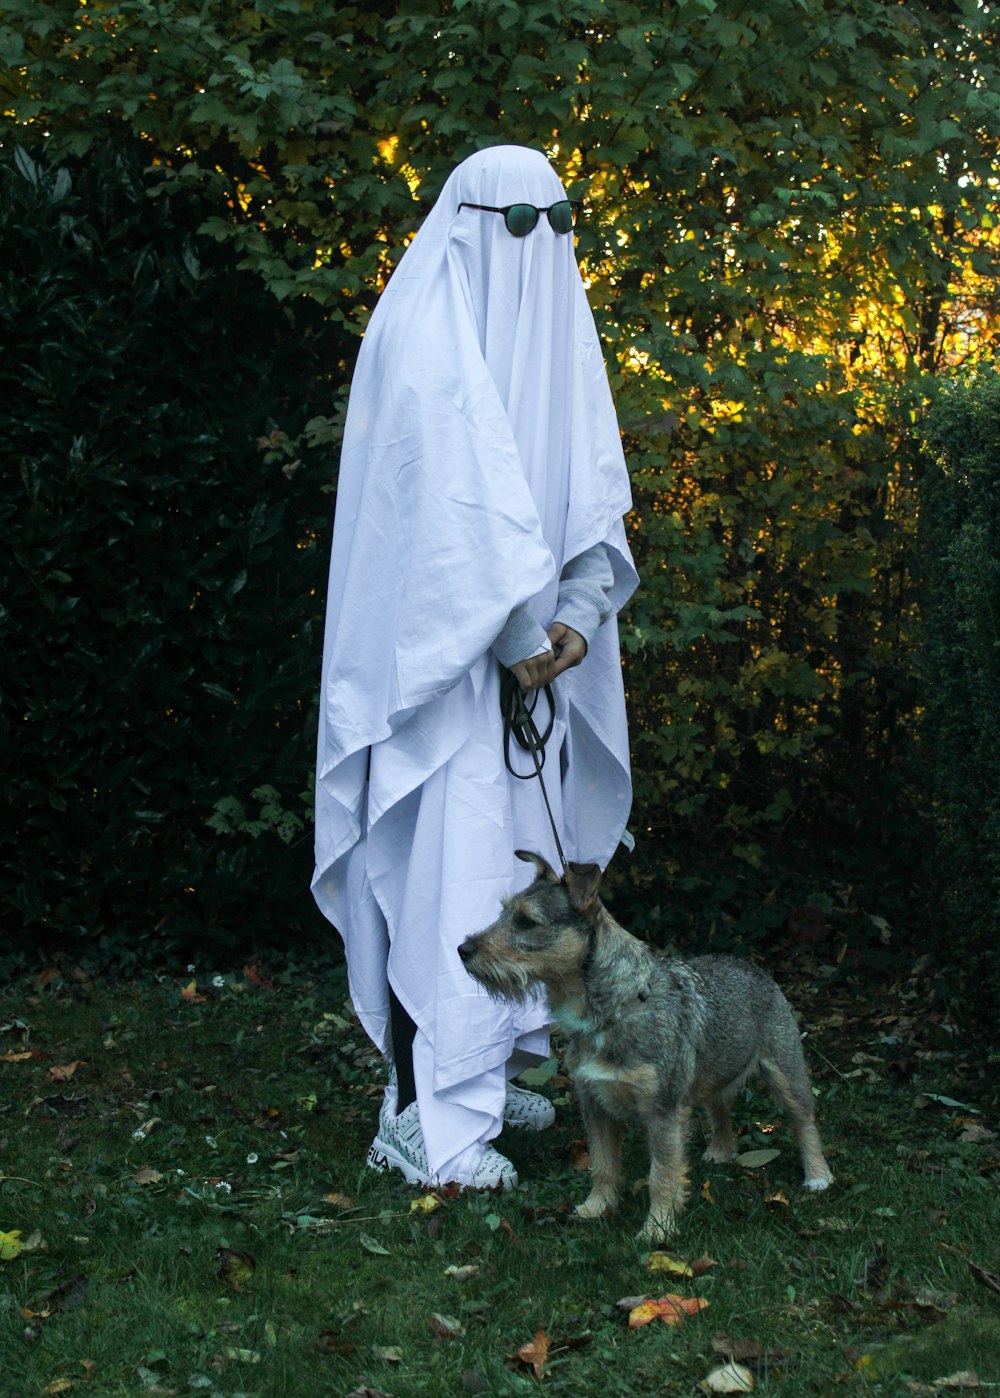 a person in a white outfit and a dog on a leash